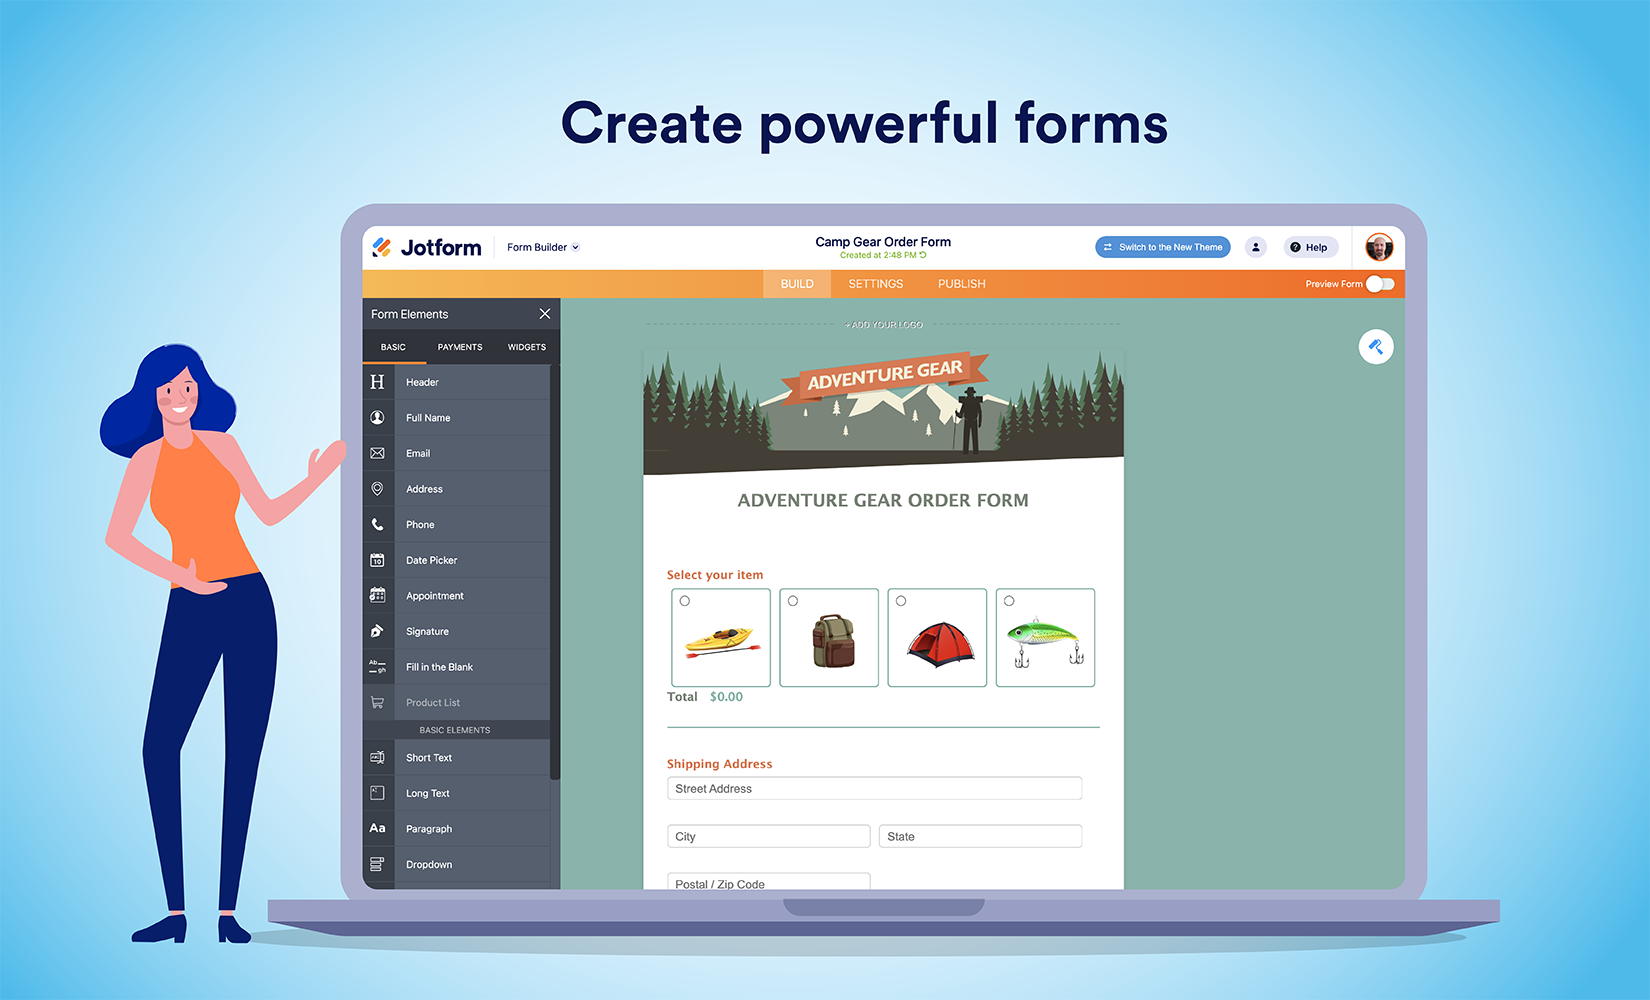 Create powerful forms